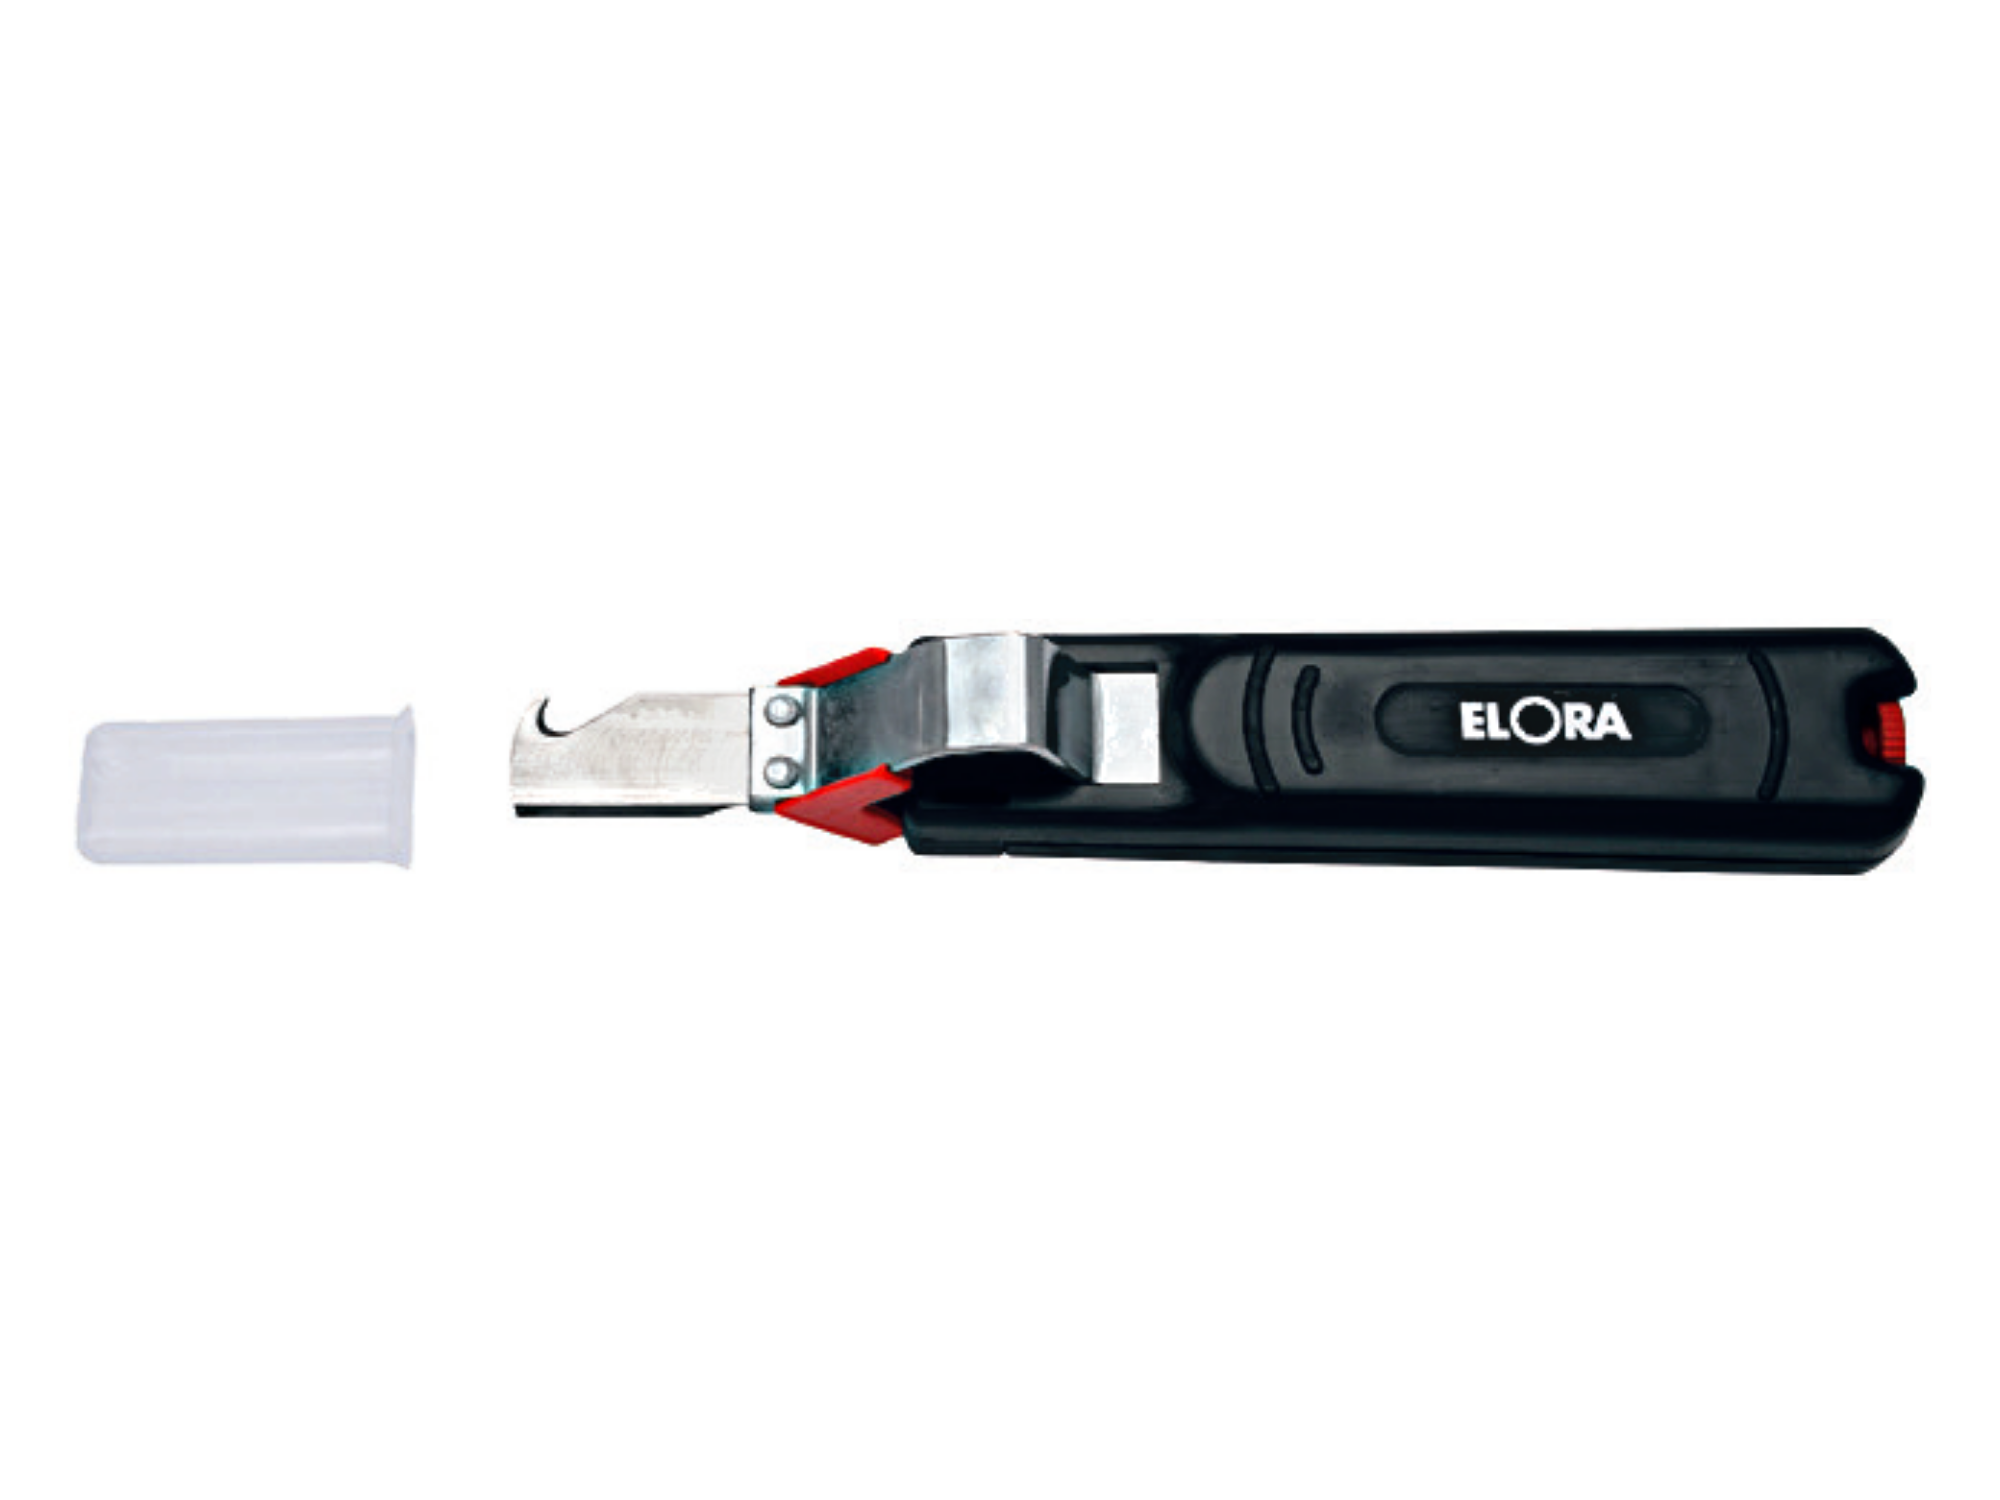 ELORA 1080 Universal Cable Knife (ELORA Tools) - Premium Cable Knife from ELORA - Shop now at Yew Aik.